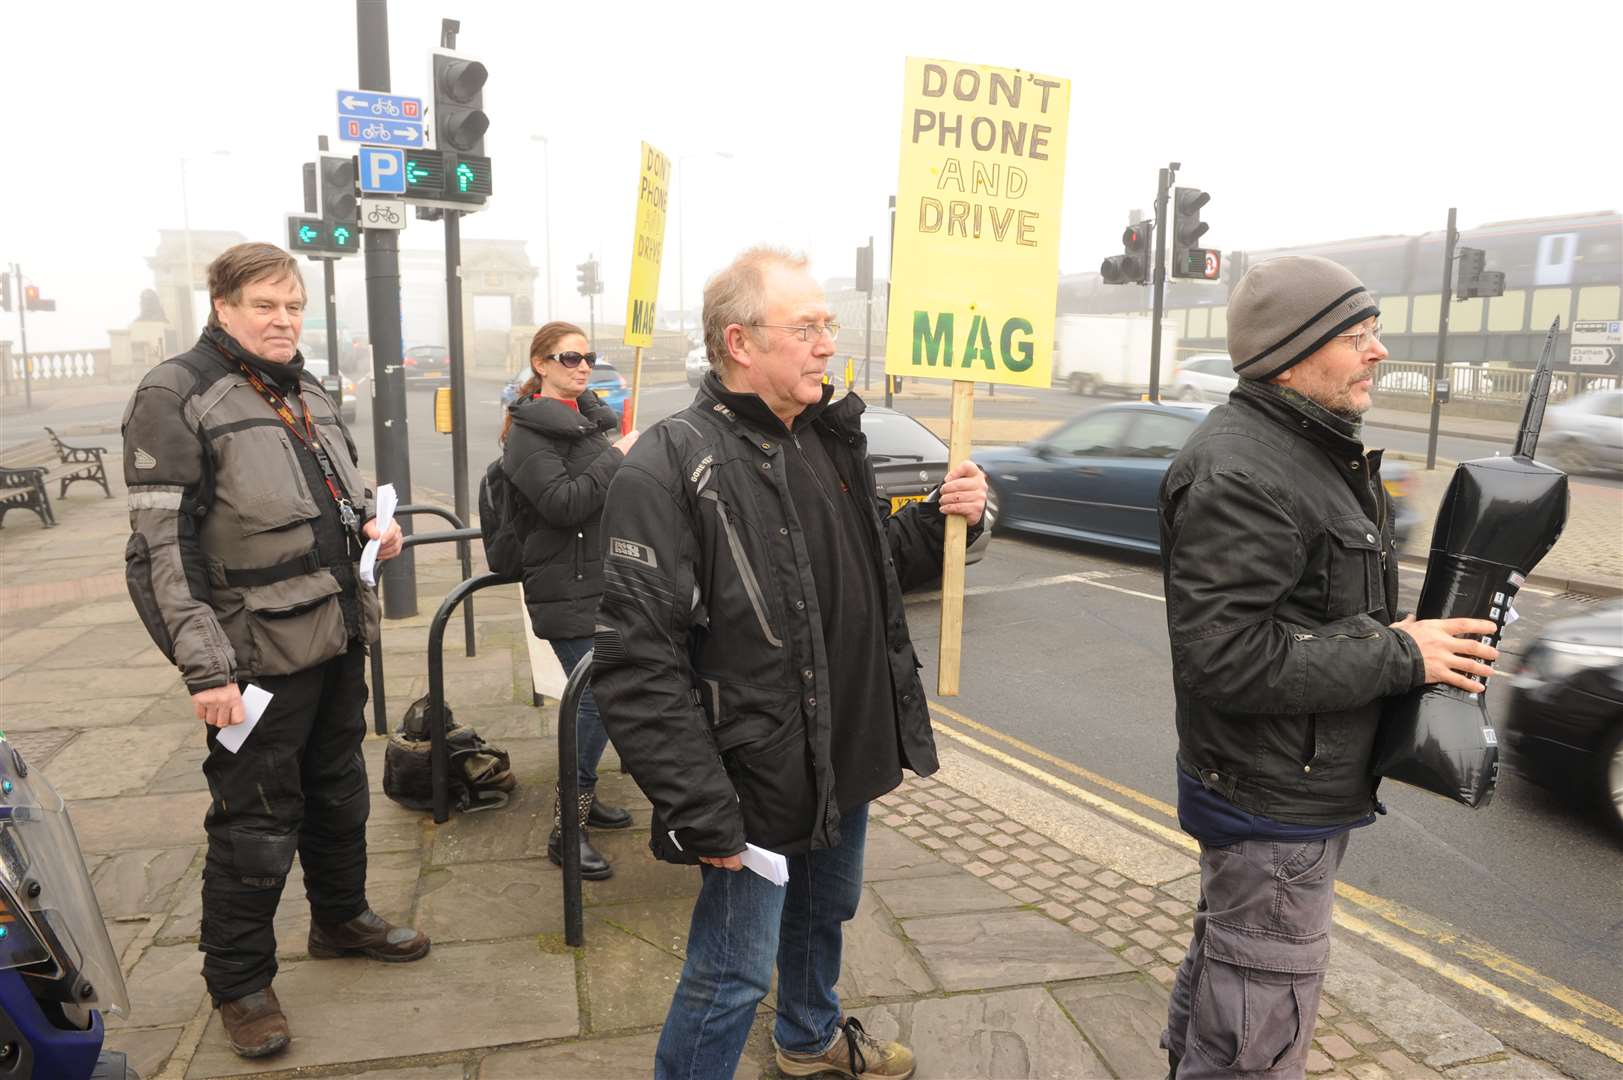 MAG members holding a peaceful demo about drivers using mobile phones